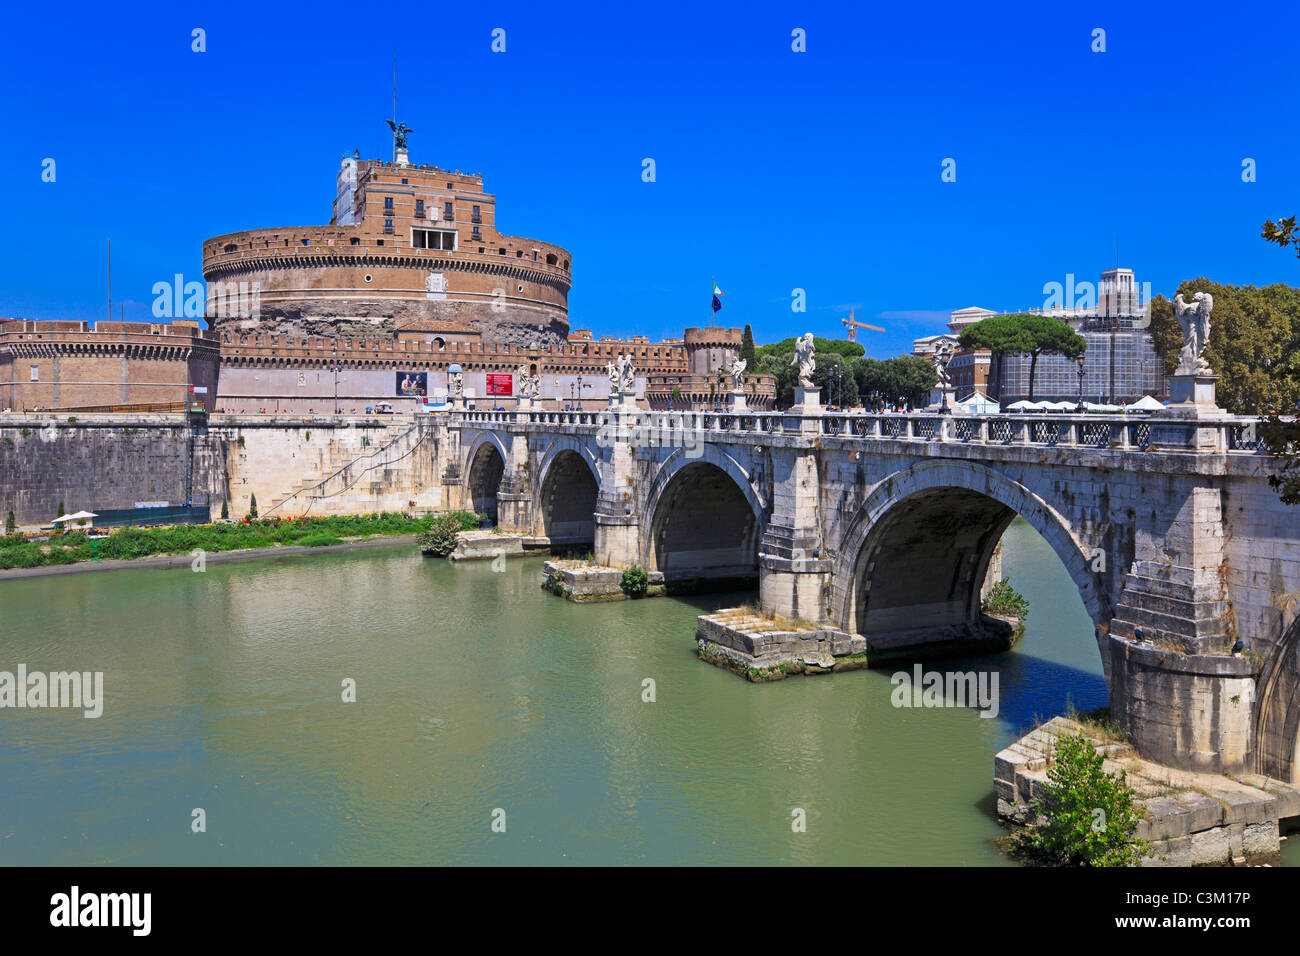 View of famous Sant Angelo Castle and Bridge across river Tiber in Rome, Italy. Stock Photo